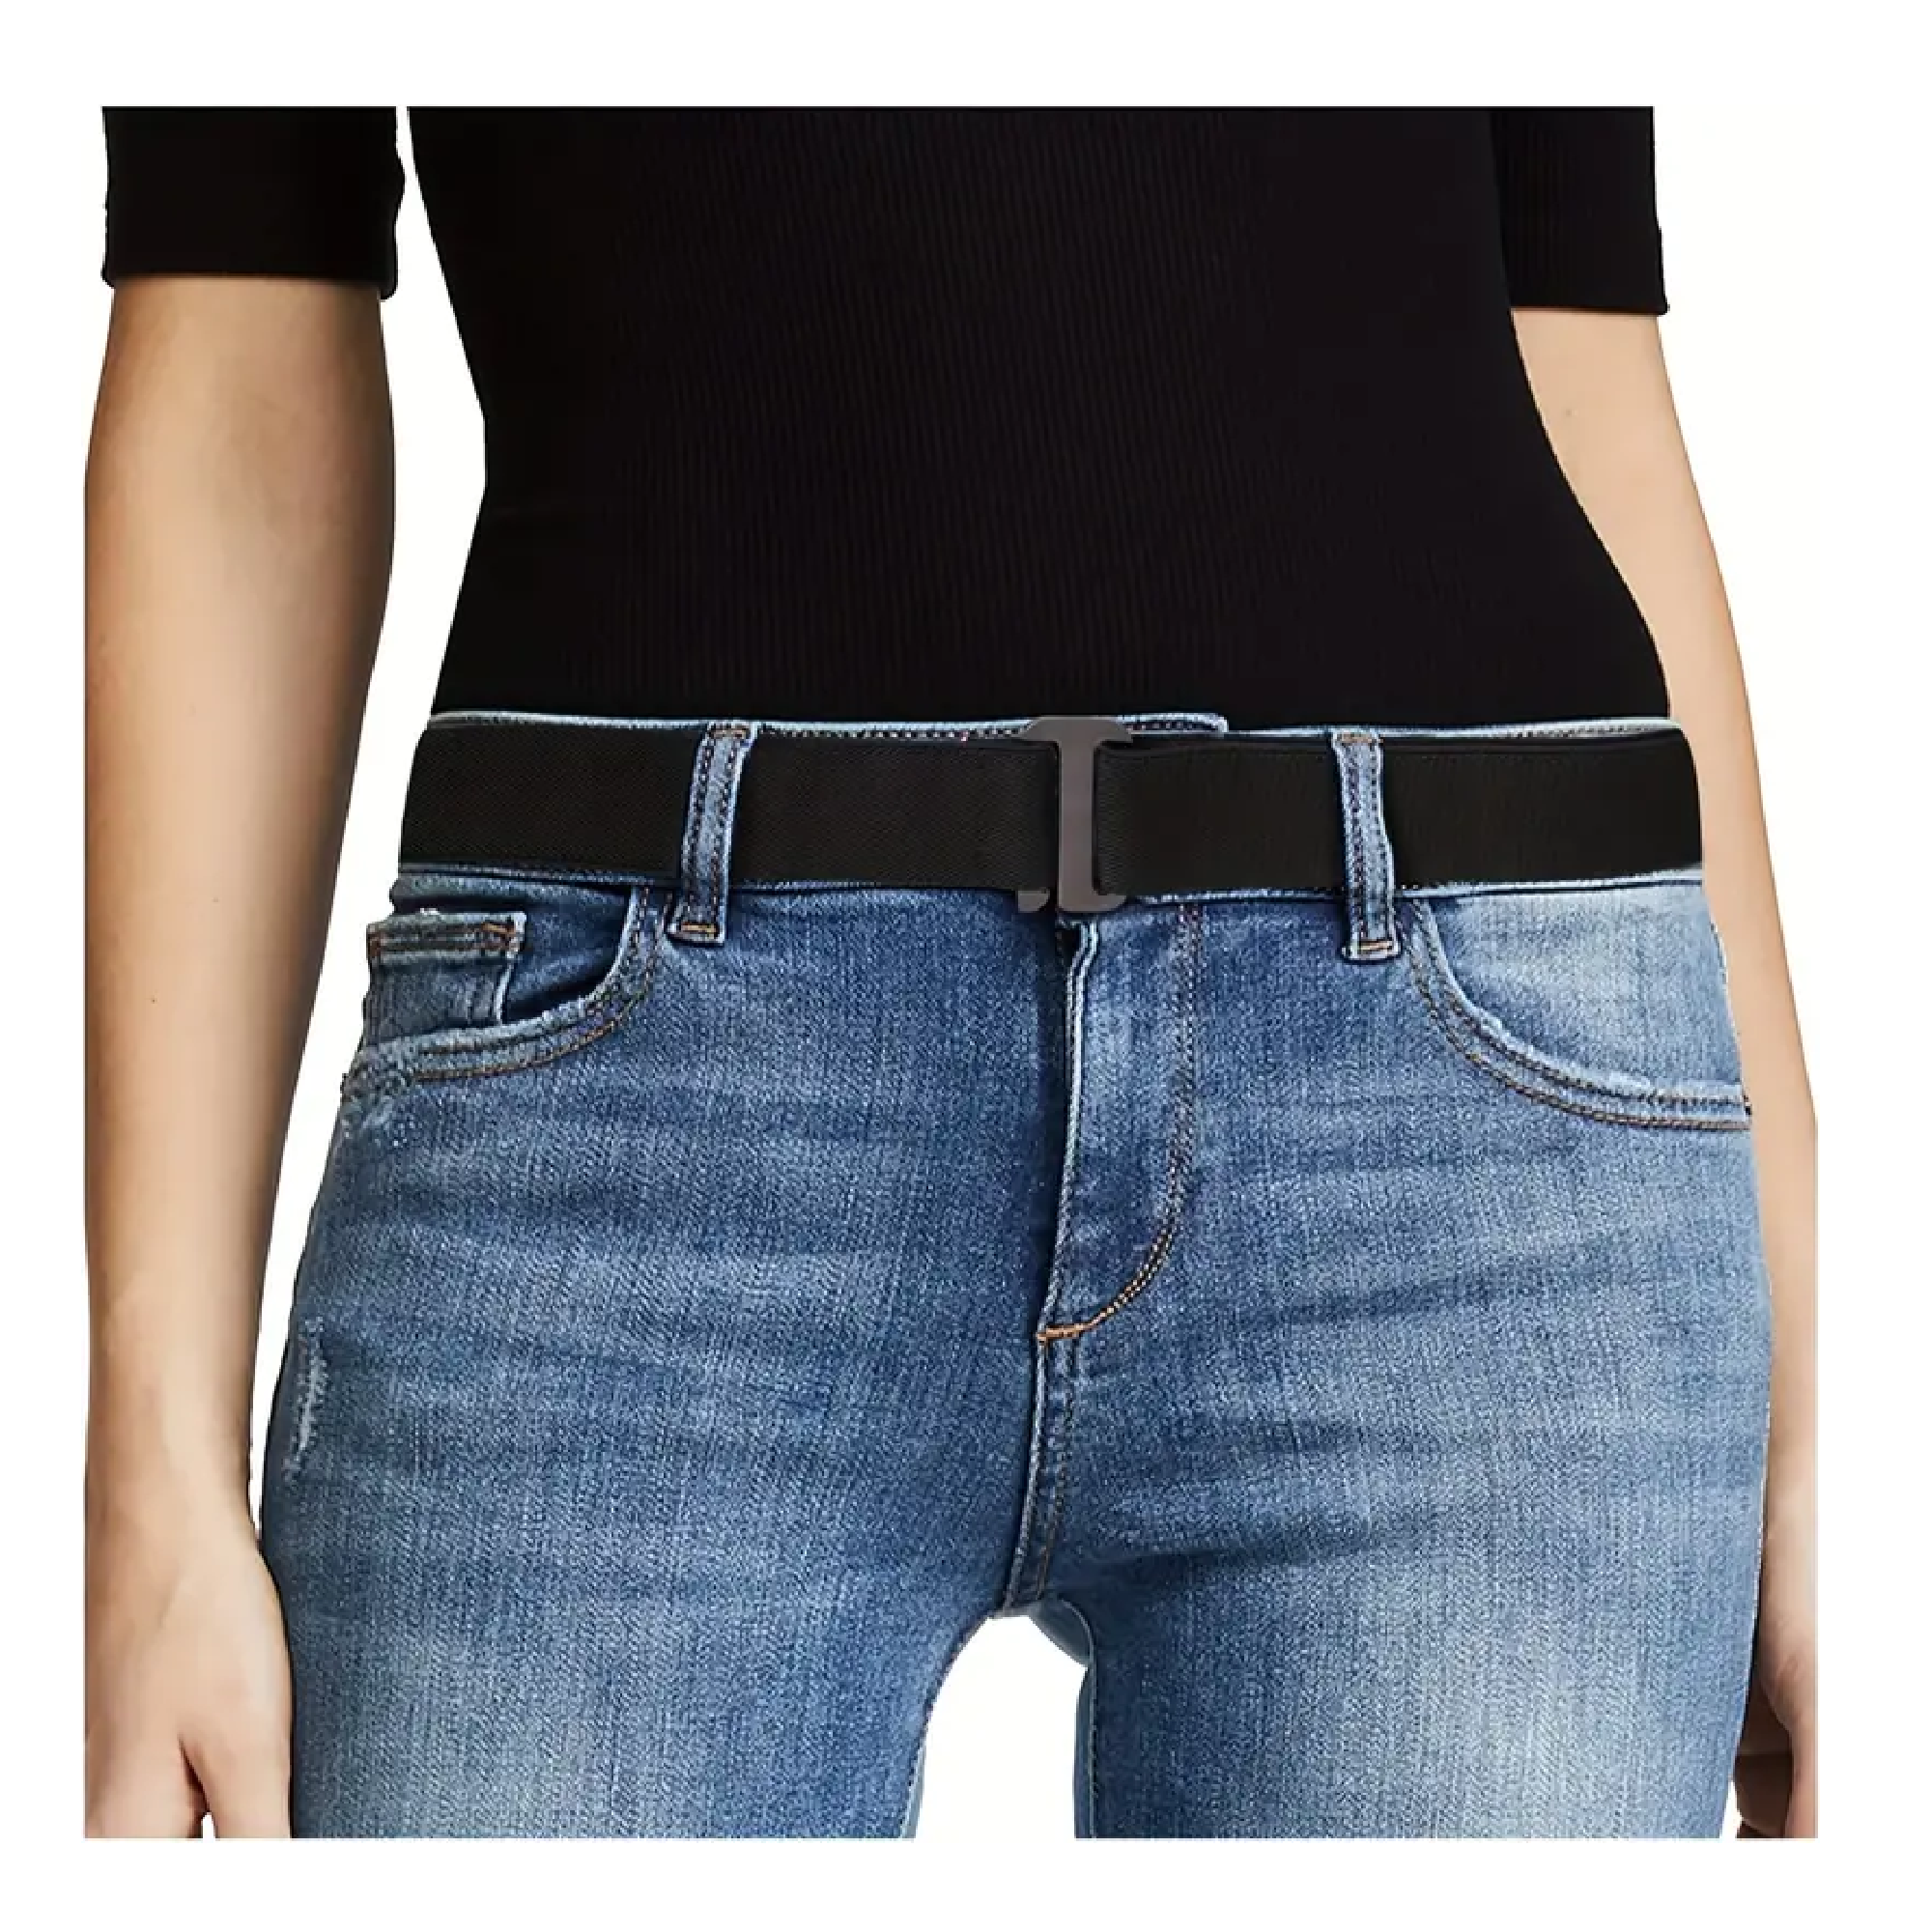 1/2pcs Women Stretch Belt Solid Color Invisible Elastic Belt With Flat Buckle For Jeans Pants Dresses